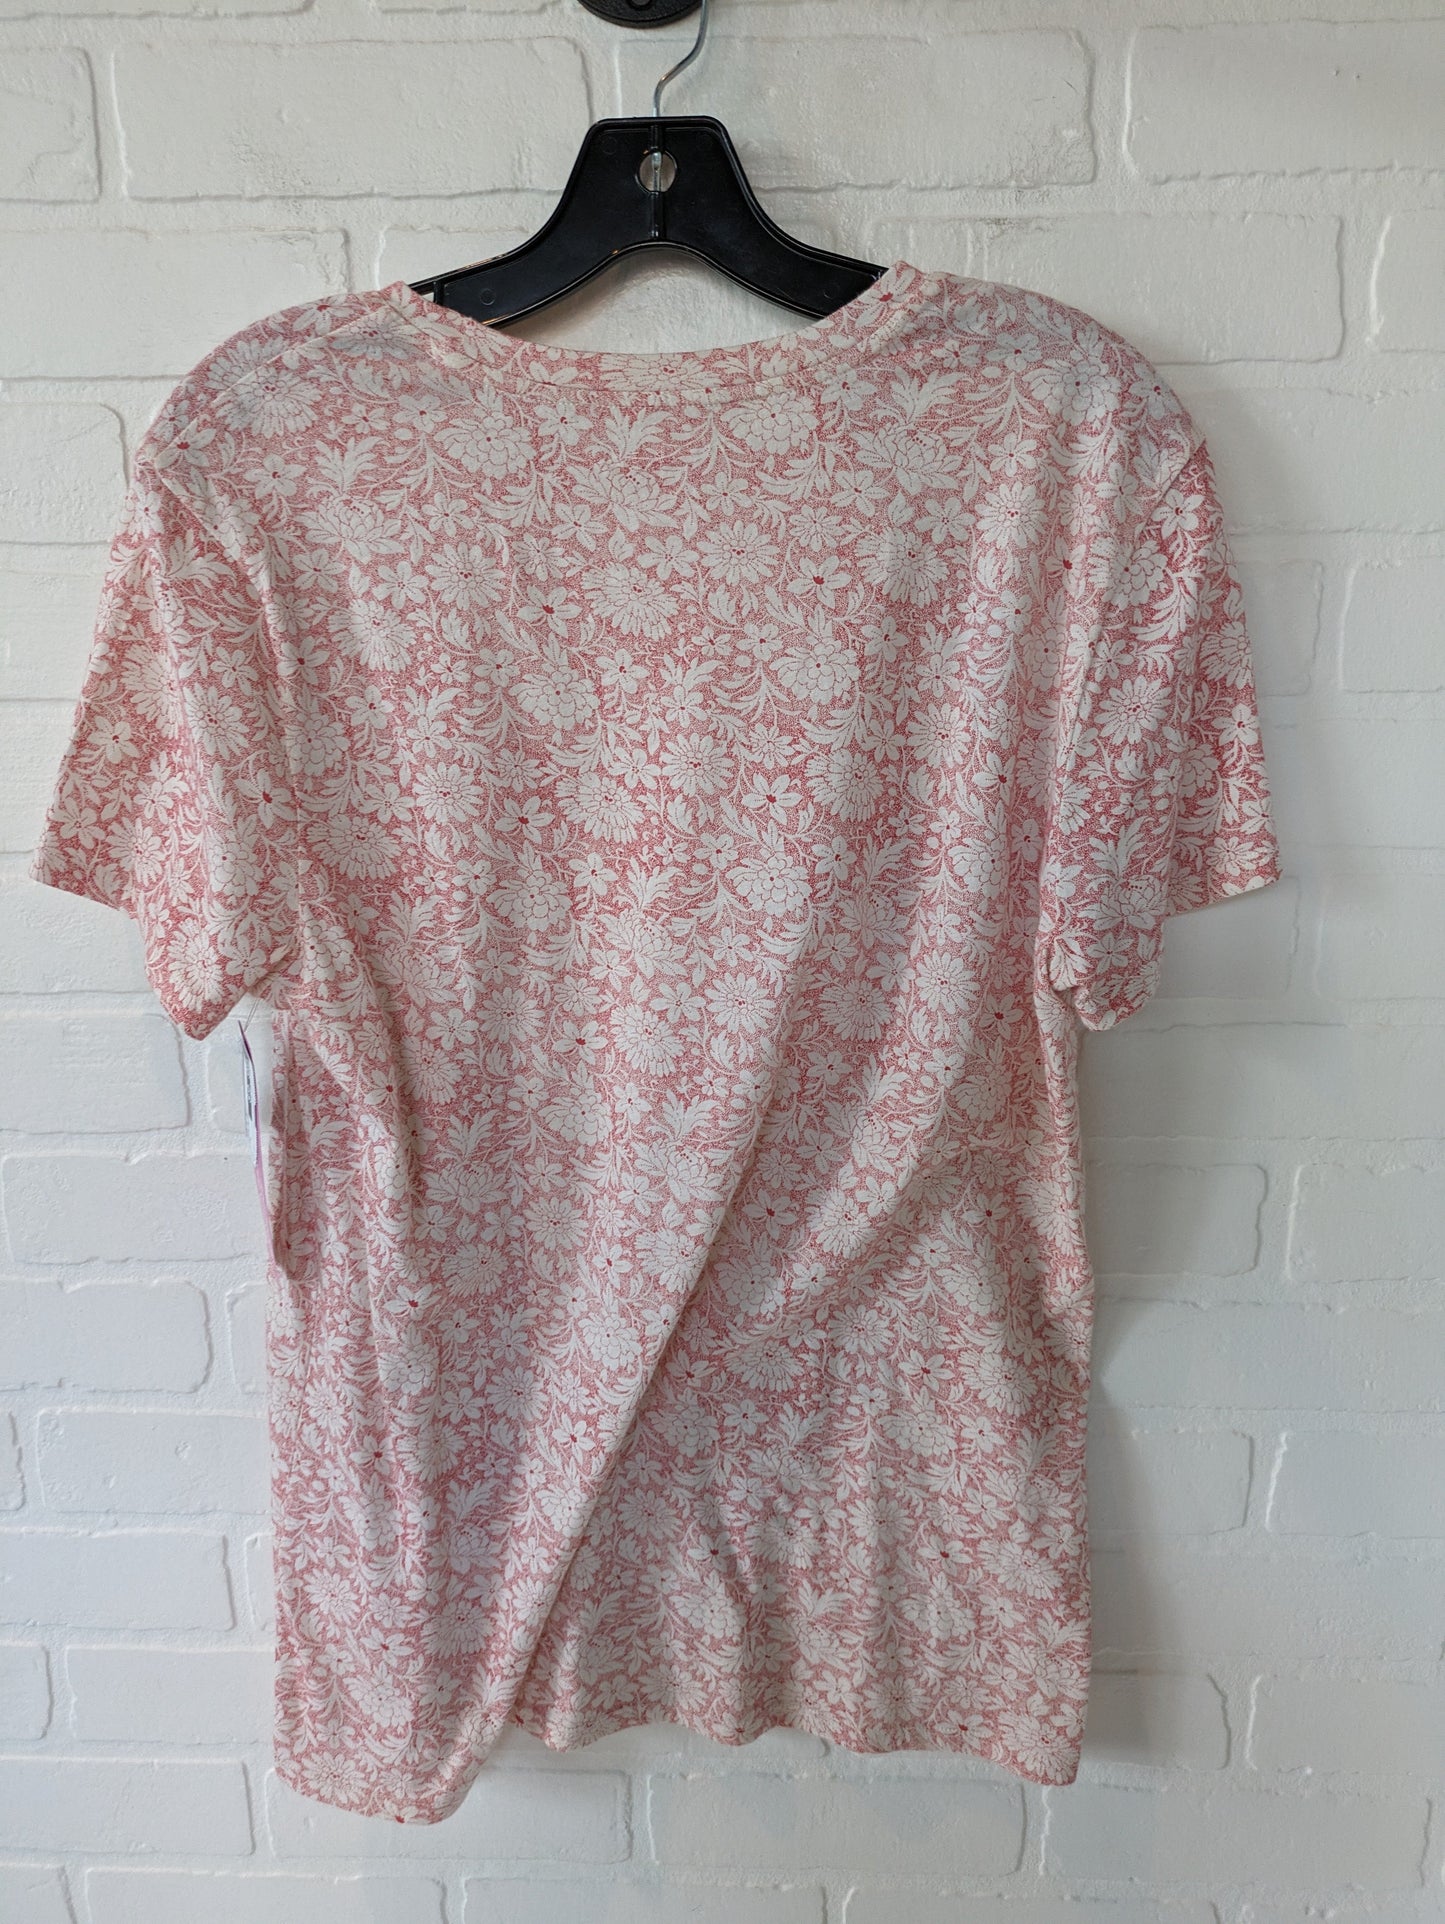 Cream & Red Top Short Sleeve Basic Lucky Brand, Size L